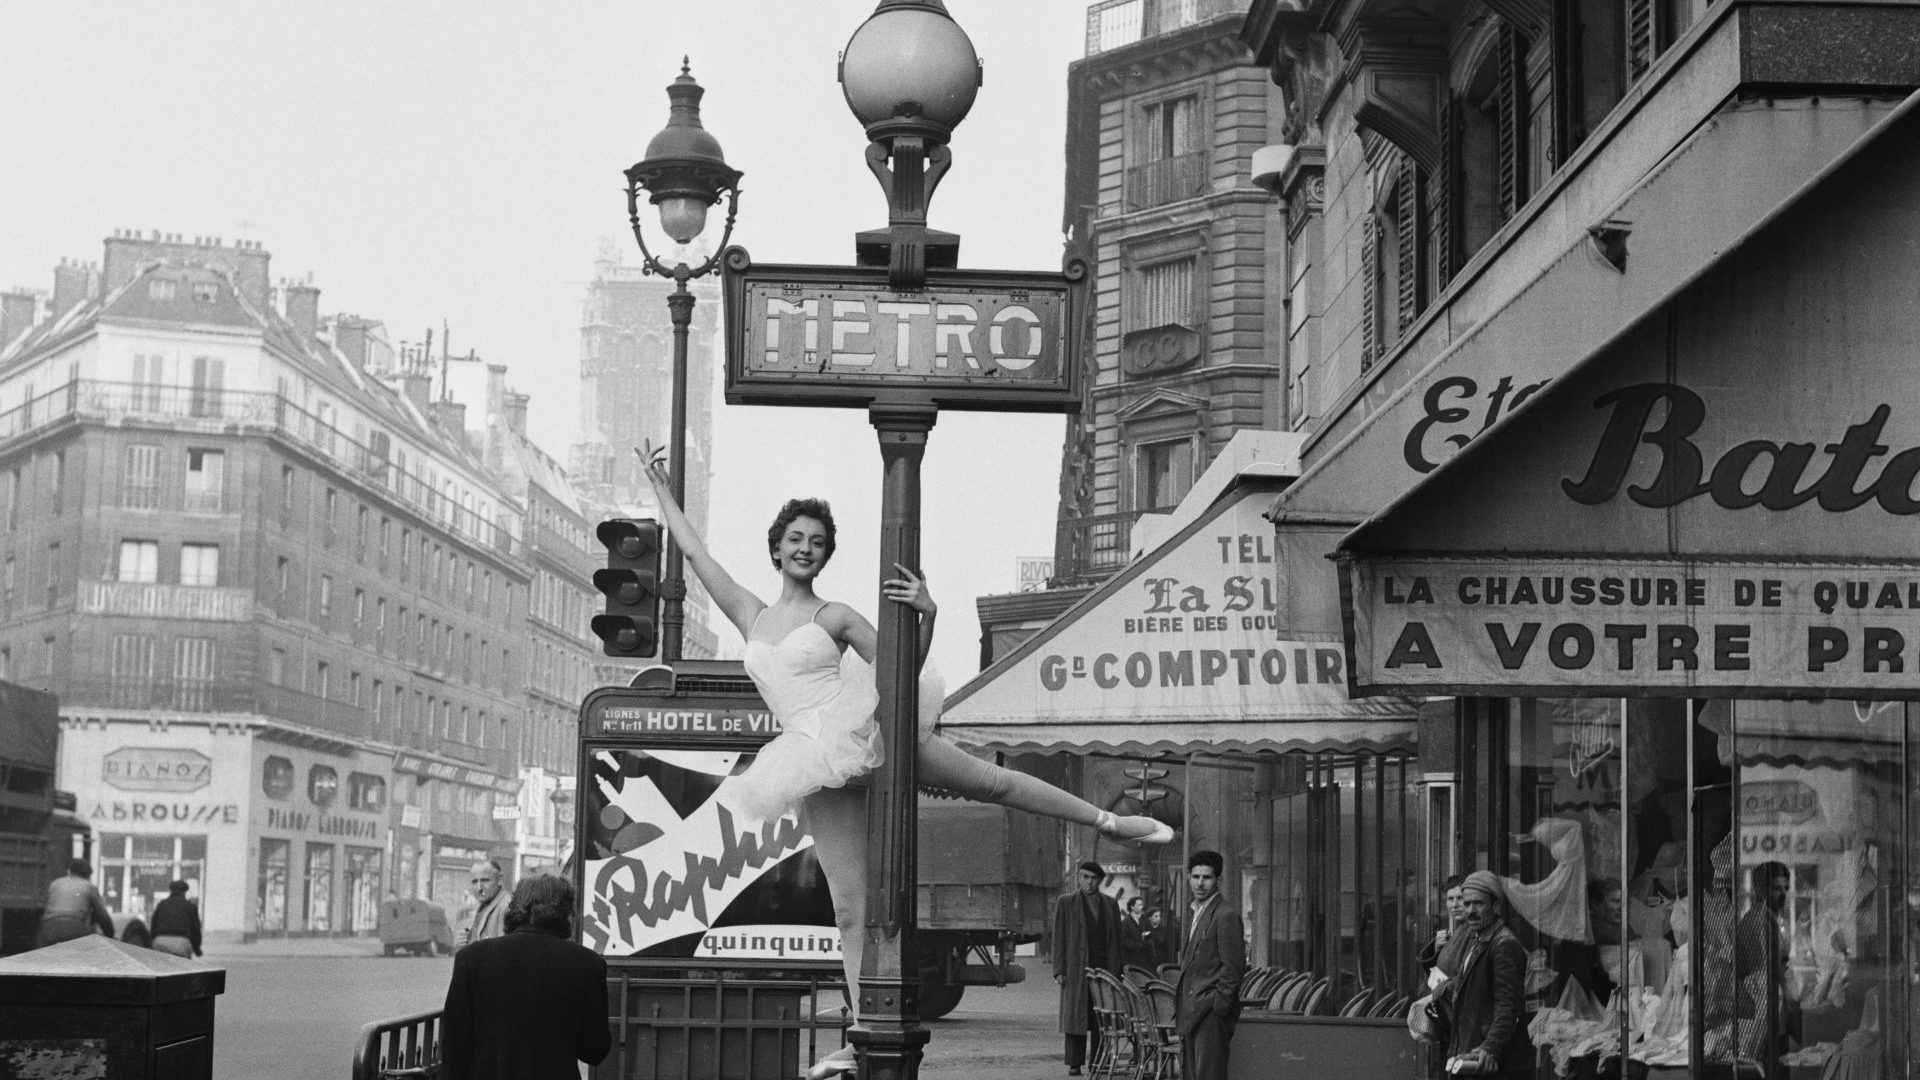 Christianne Gaulthier, a dancer at the Moulin Rouge, poses outside the Hotel de Ville Métro station in 1955. Photo: Serge Berton/BIPs/Hulton Archive/Getty